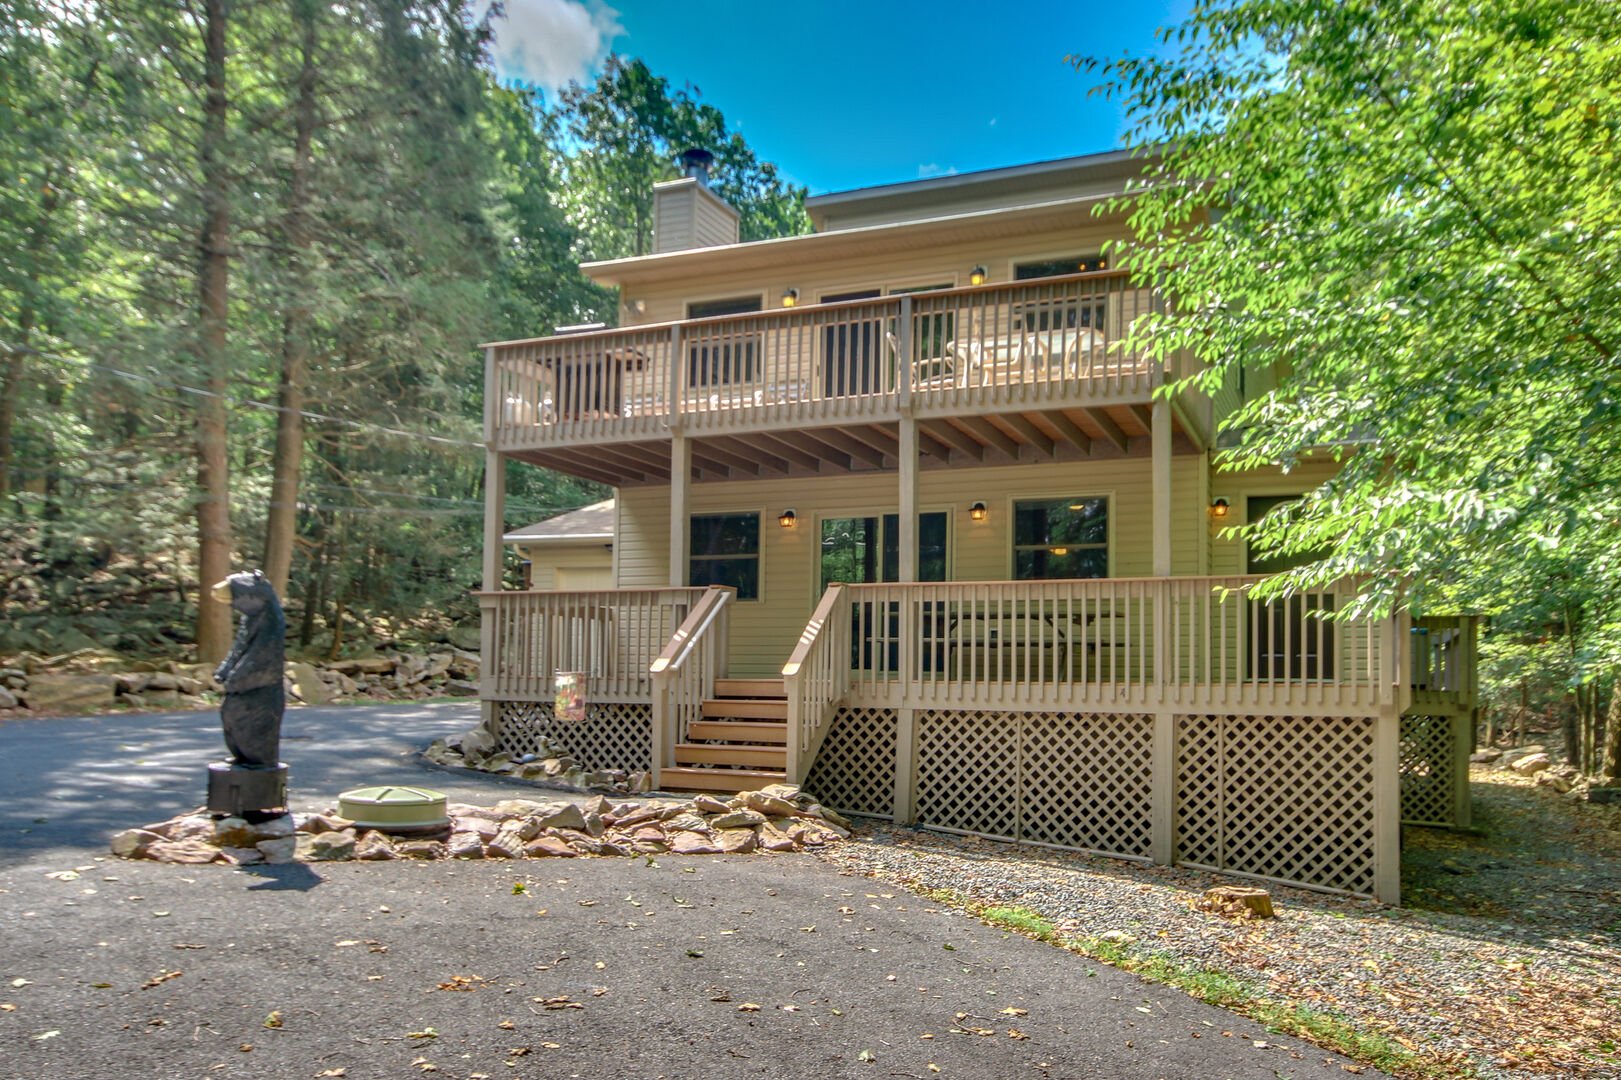 The exterior of this Lake Harmony rental, with its two patios and a bear statue out front.